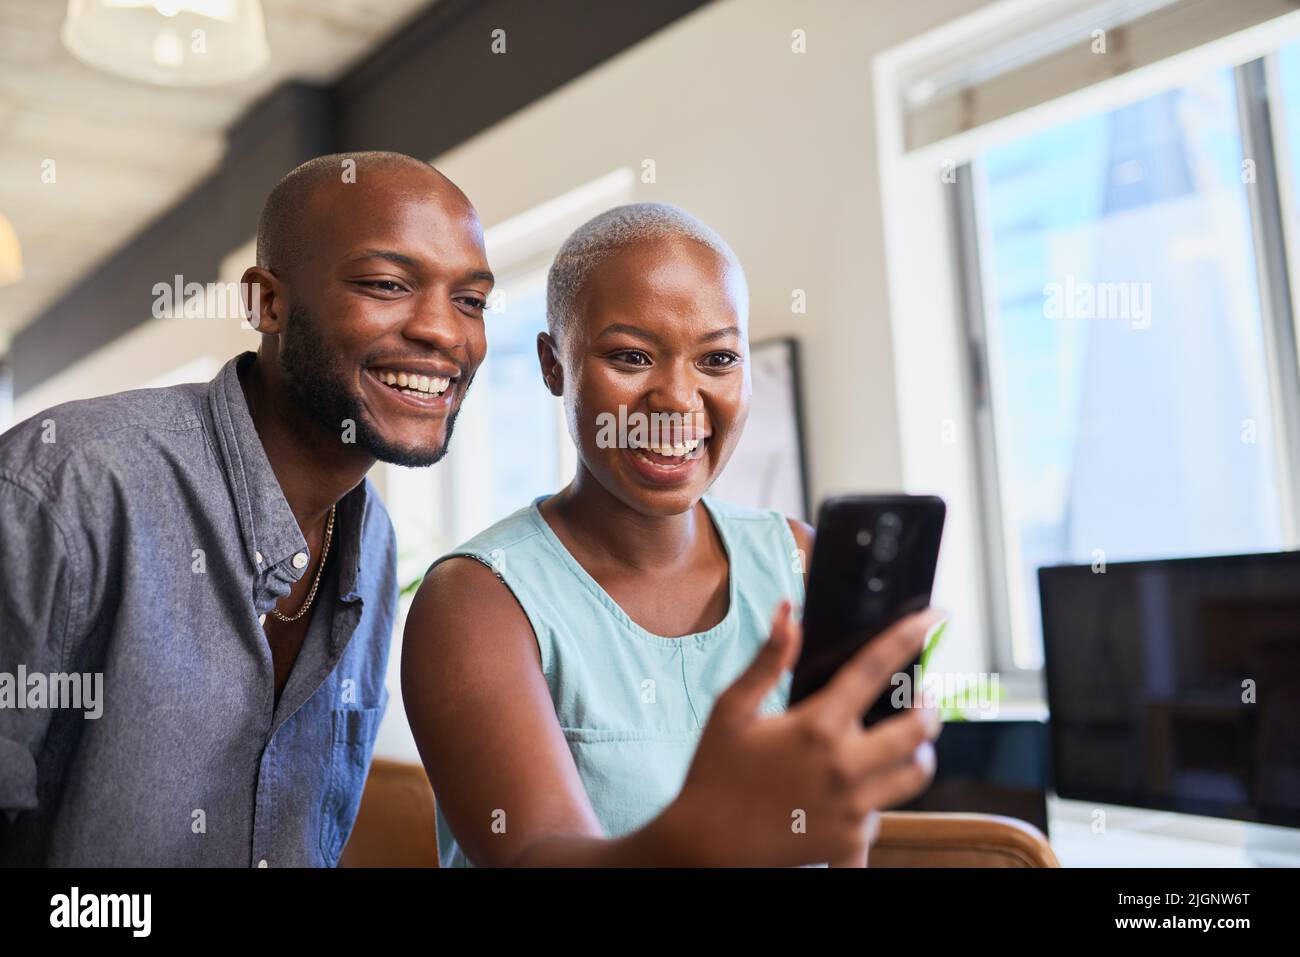 Two Black colleagues laugh on a video call on mobile phone Stock Photo